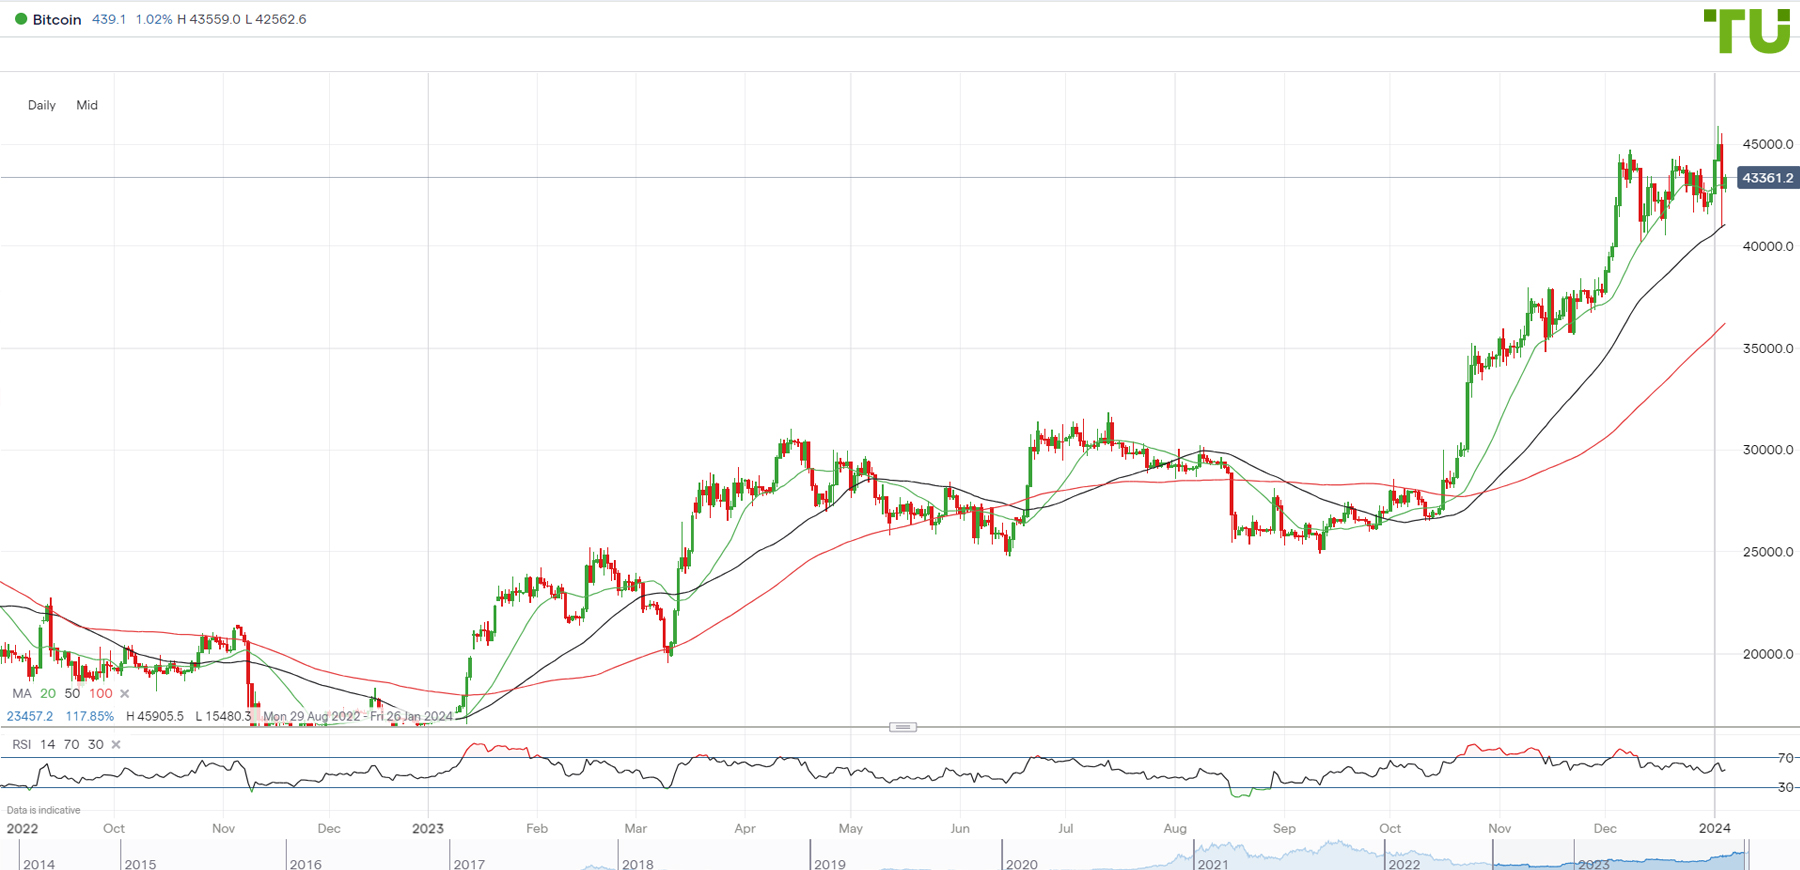 BTC/USD sold off on the rise, but demand on the fall persists